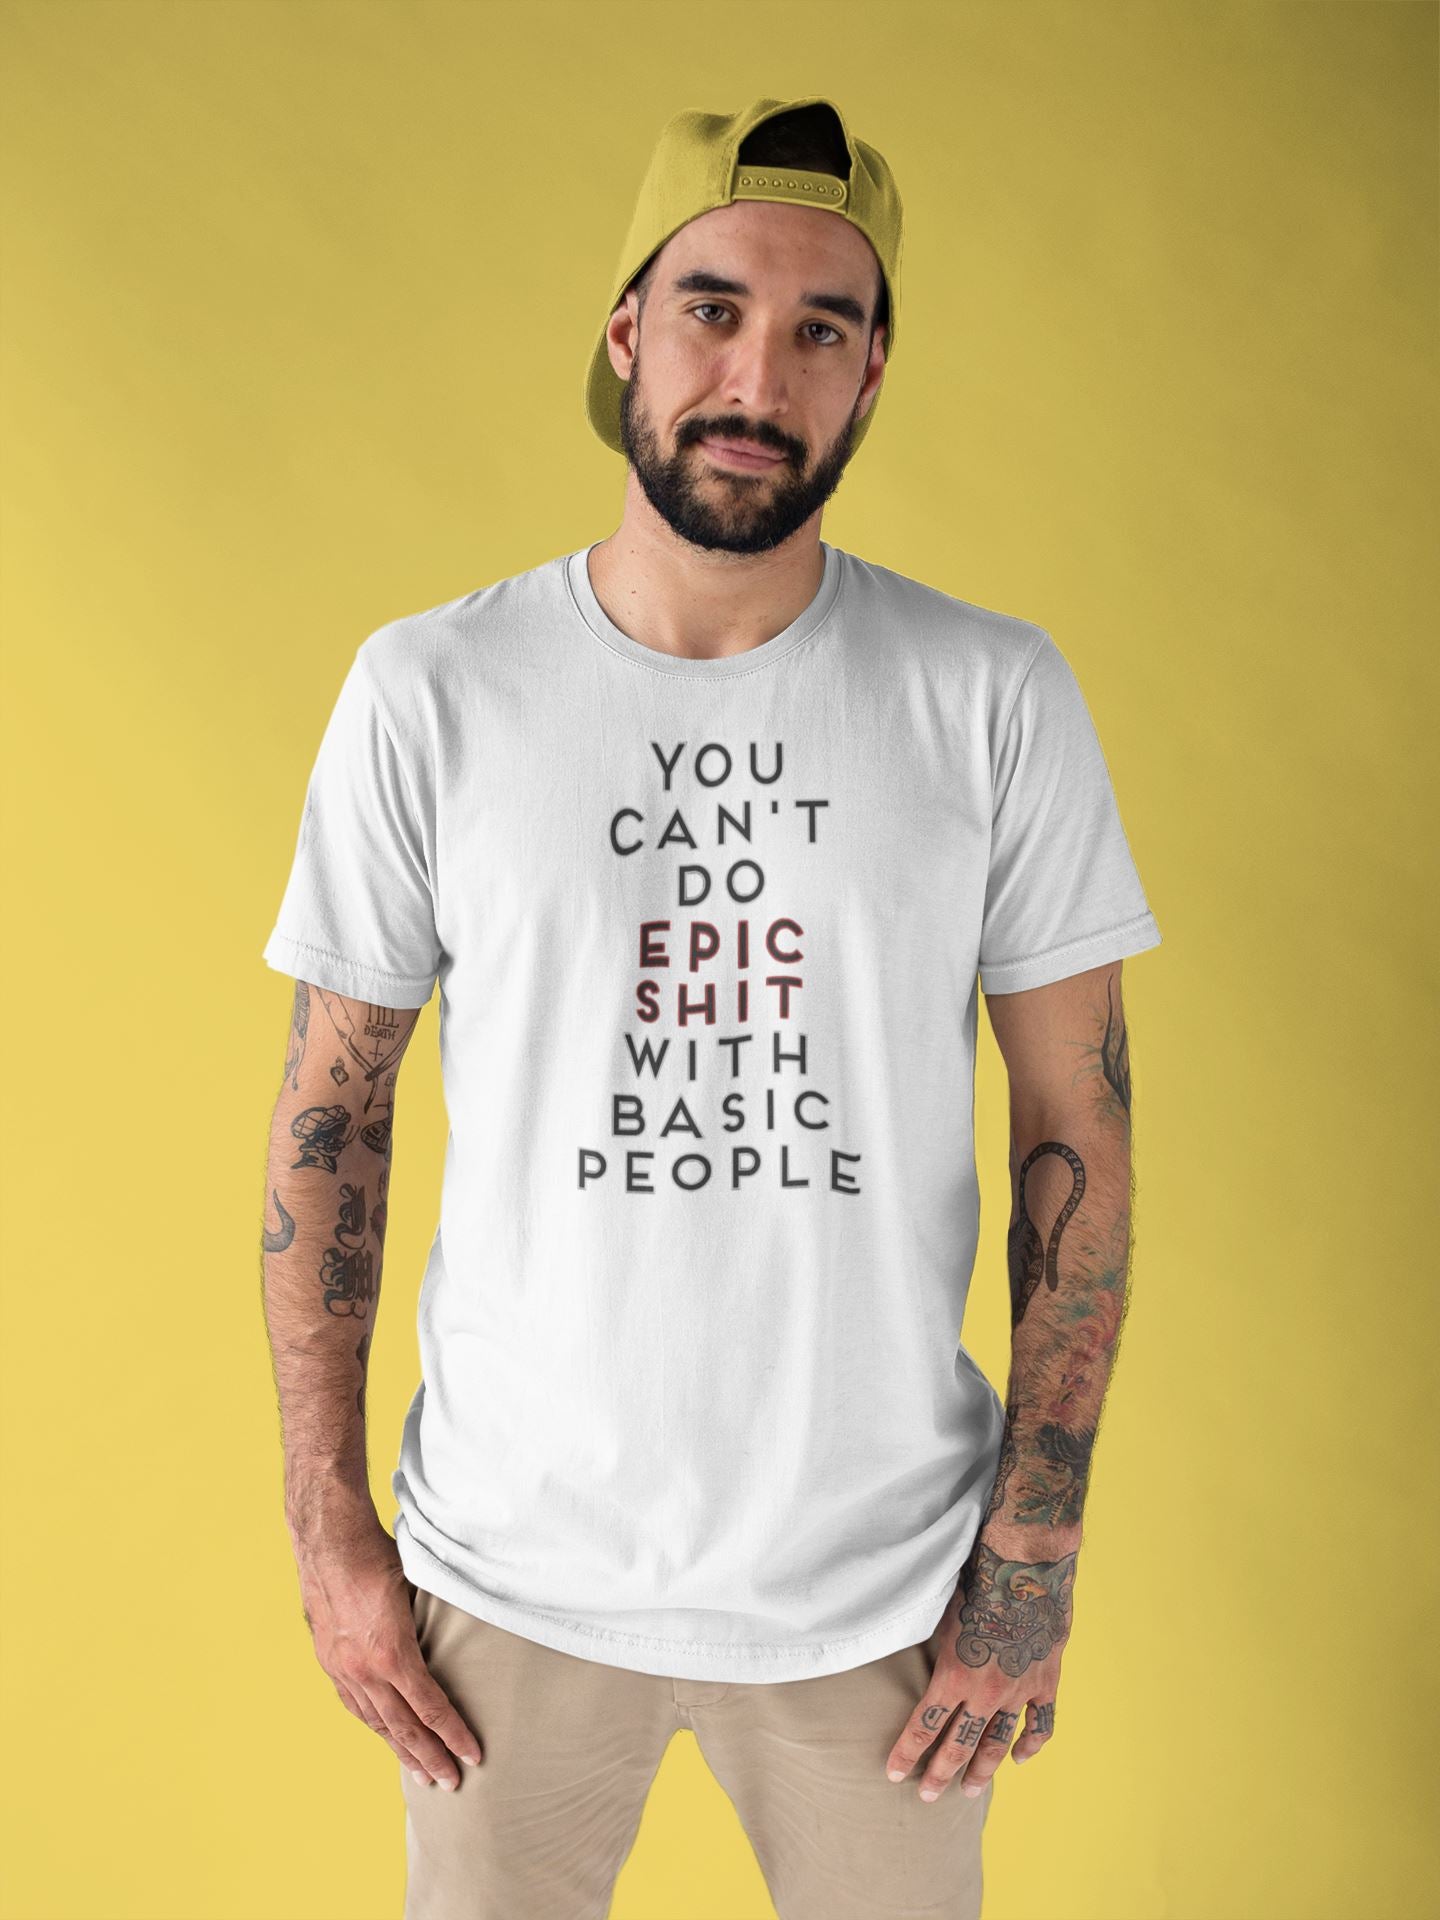 You Can't Do Epic Shit with Basic People Supreme White T Shirt for Men and Women freeshipping - Catch My Drift India